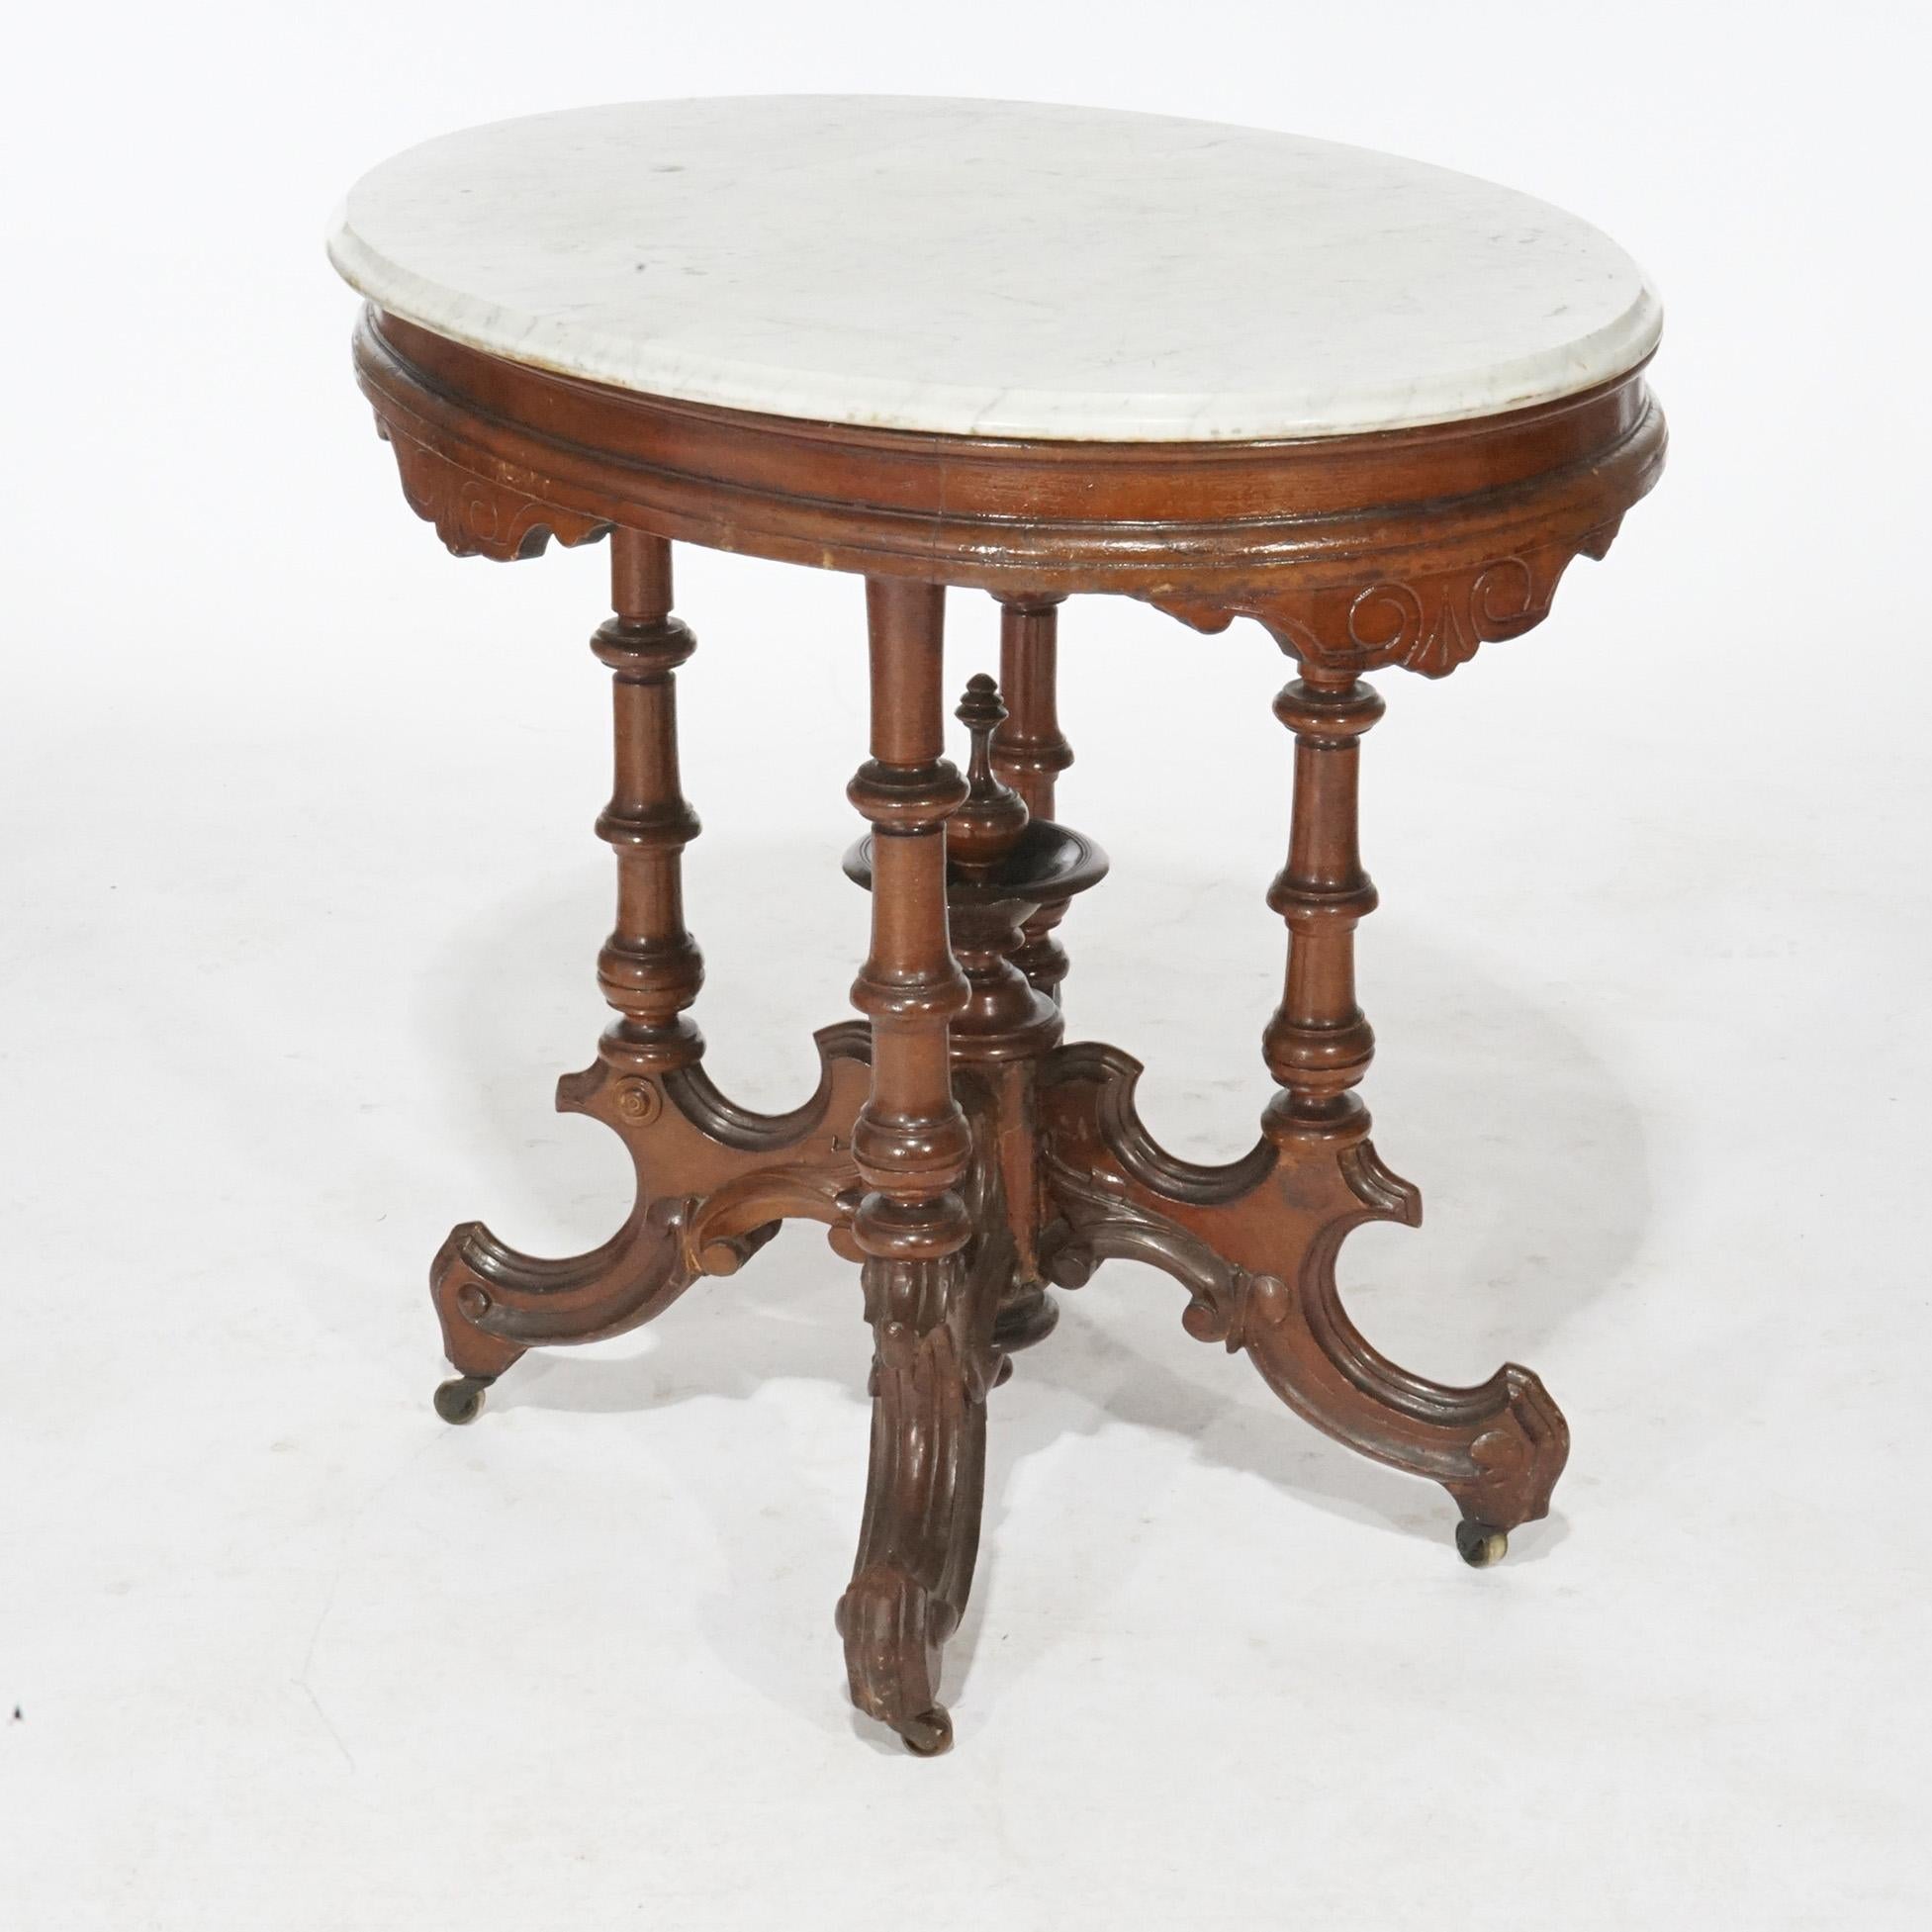 Antique Renaissance Revival Walnut Oval Marble Top Parlor Table, circa 1890 In Good Condition For Sale In Big Flats, NY